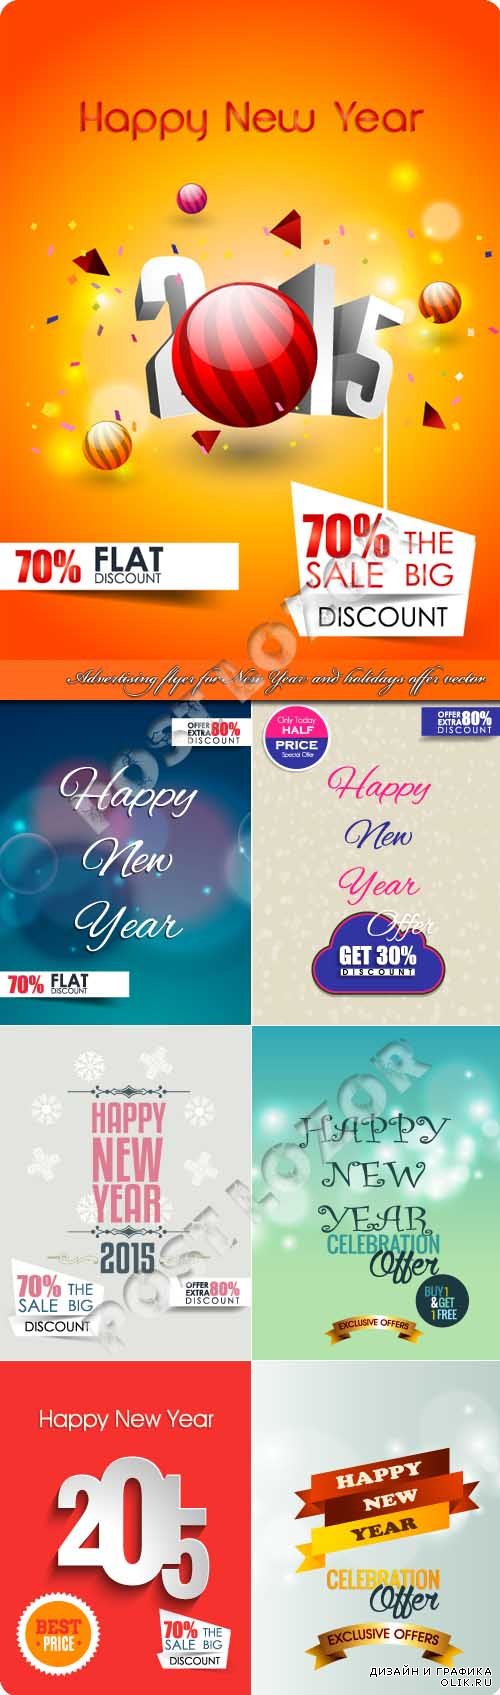 Advertising flyer for New Year and holidays offer vector 